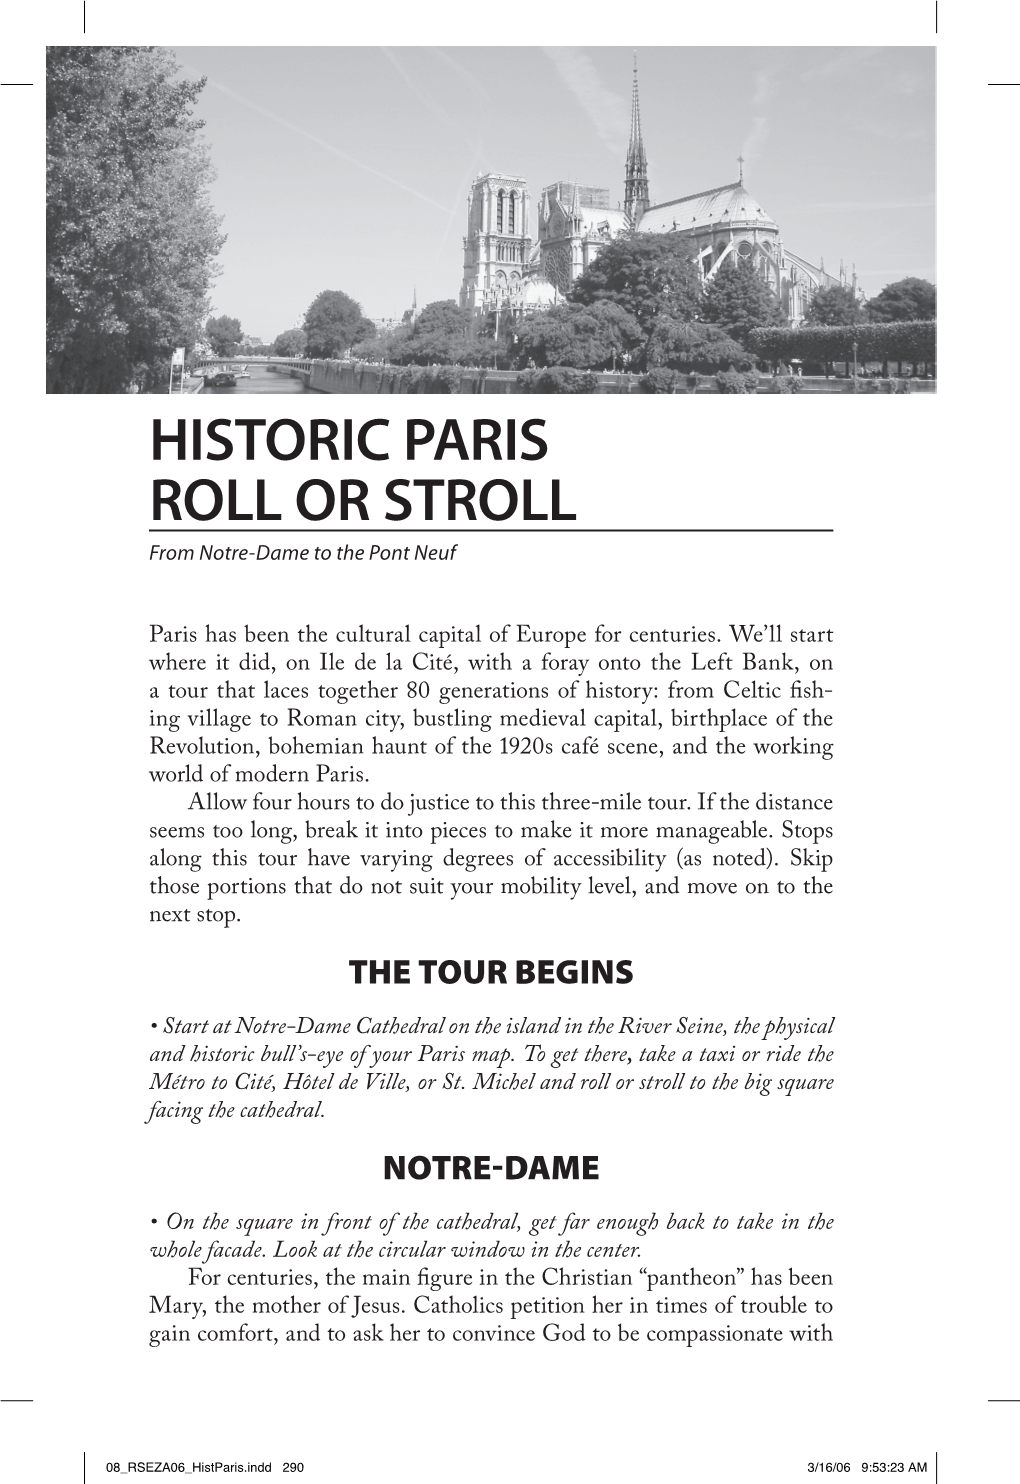 HISTORIC PARIS ROLL OR STROLL from Notre-Dame to the Pont Neuf